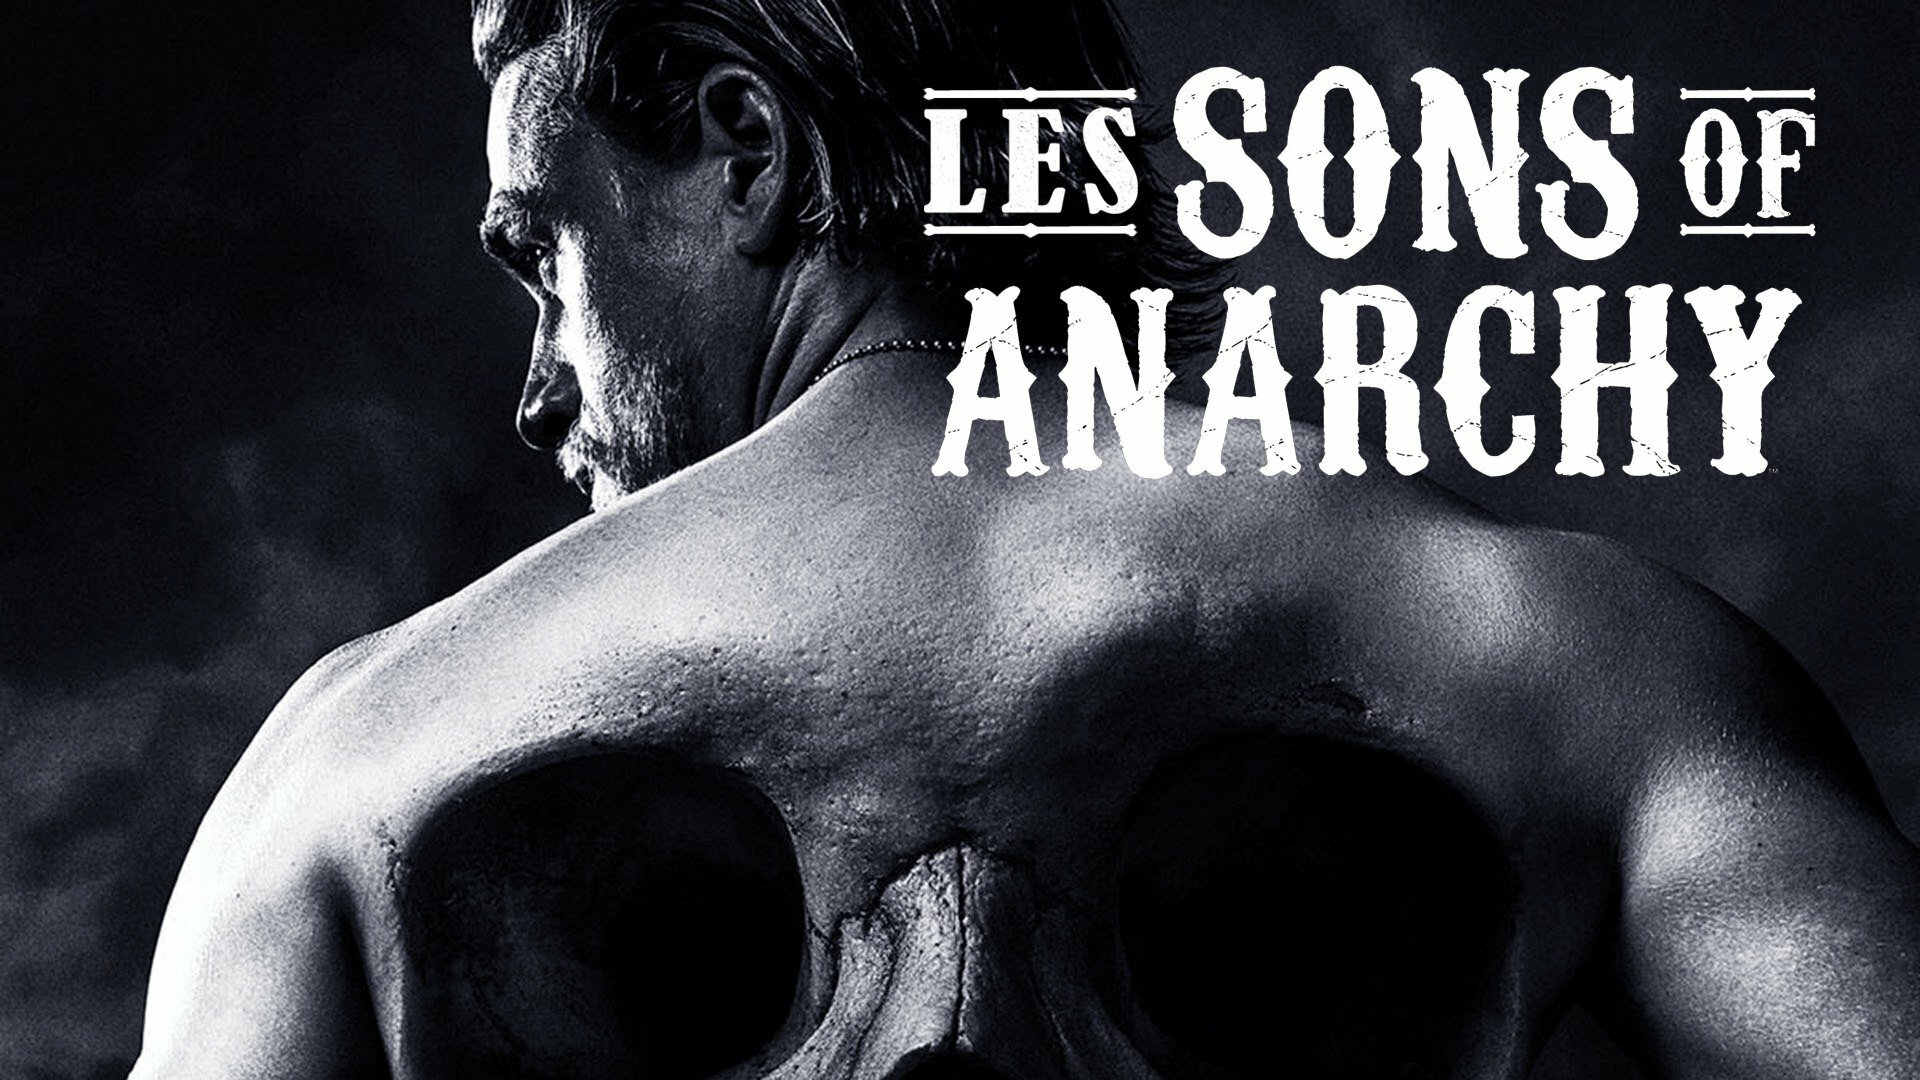 Les sons of anarchy